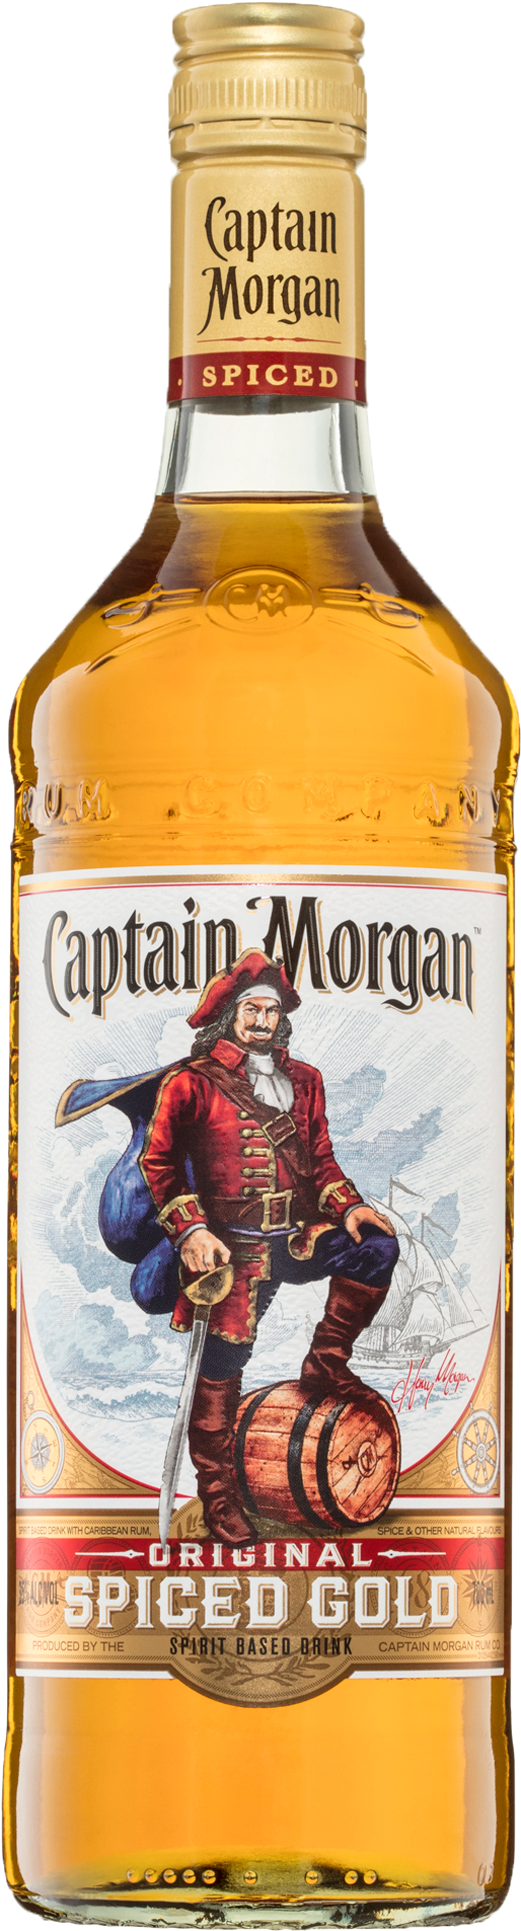 A Bottle Of Liquor With A Pirate On It